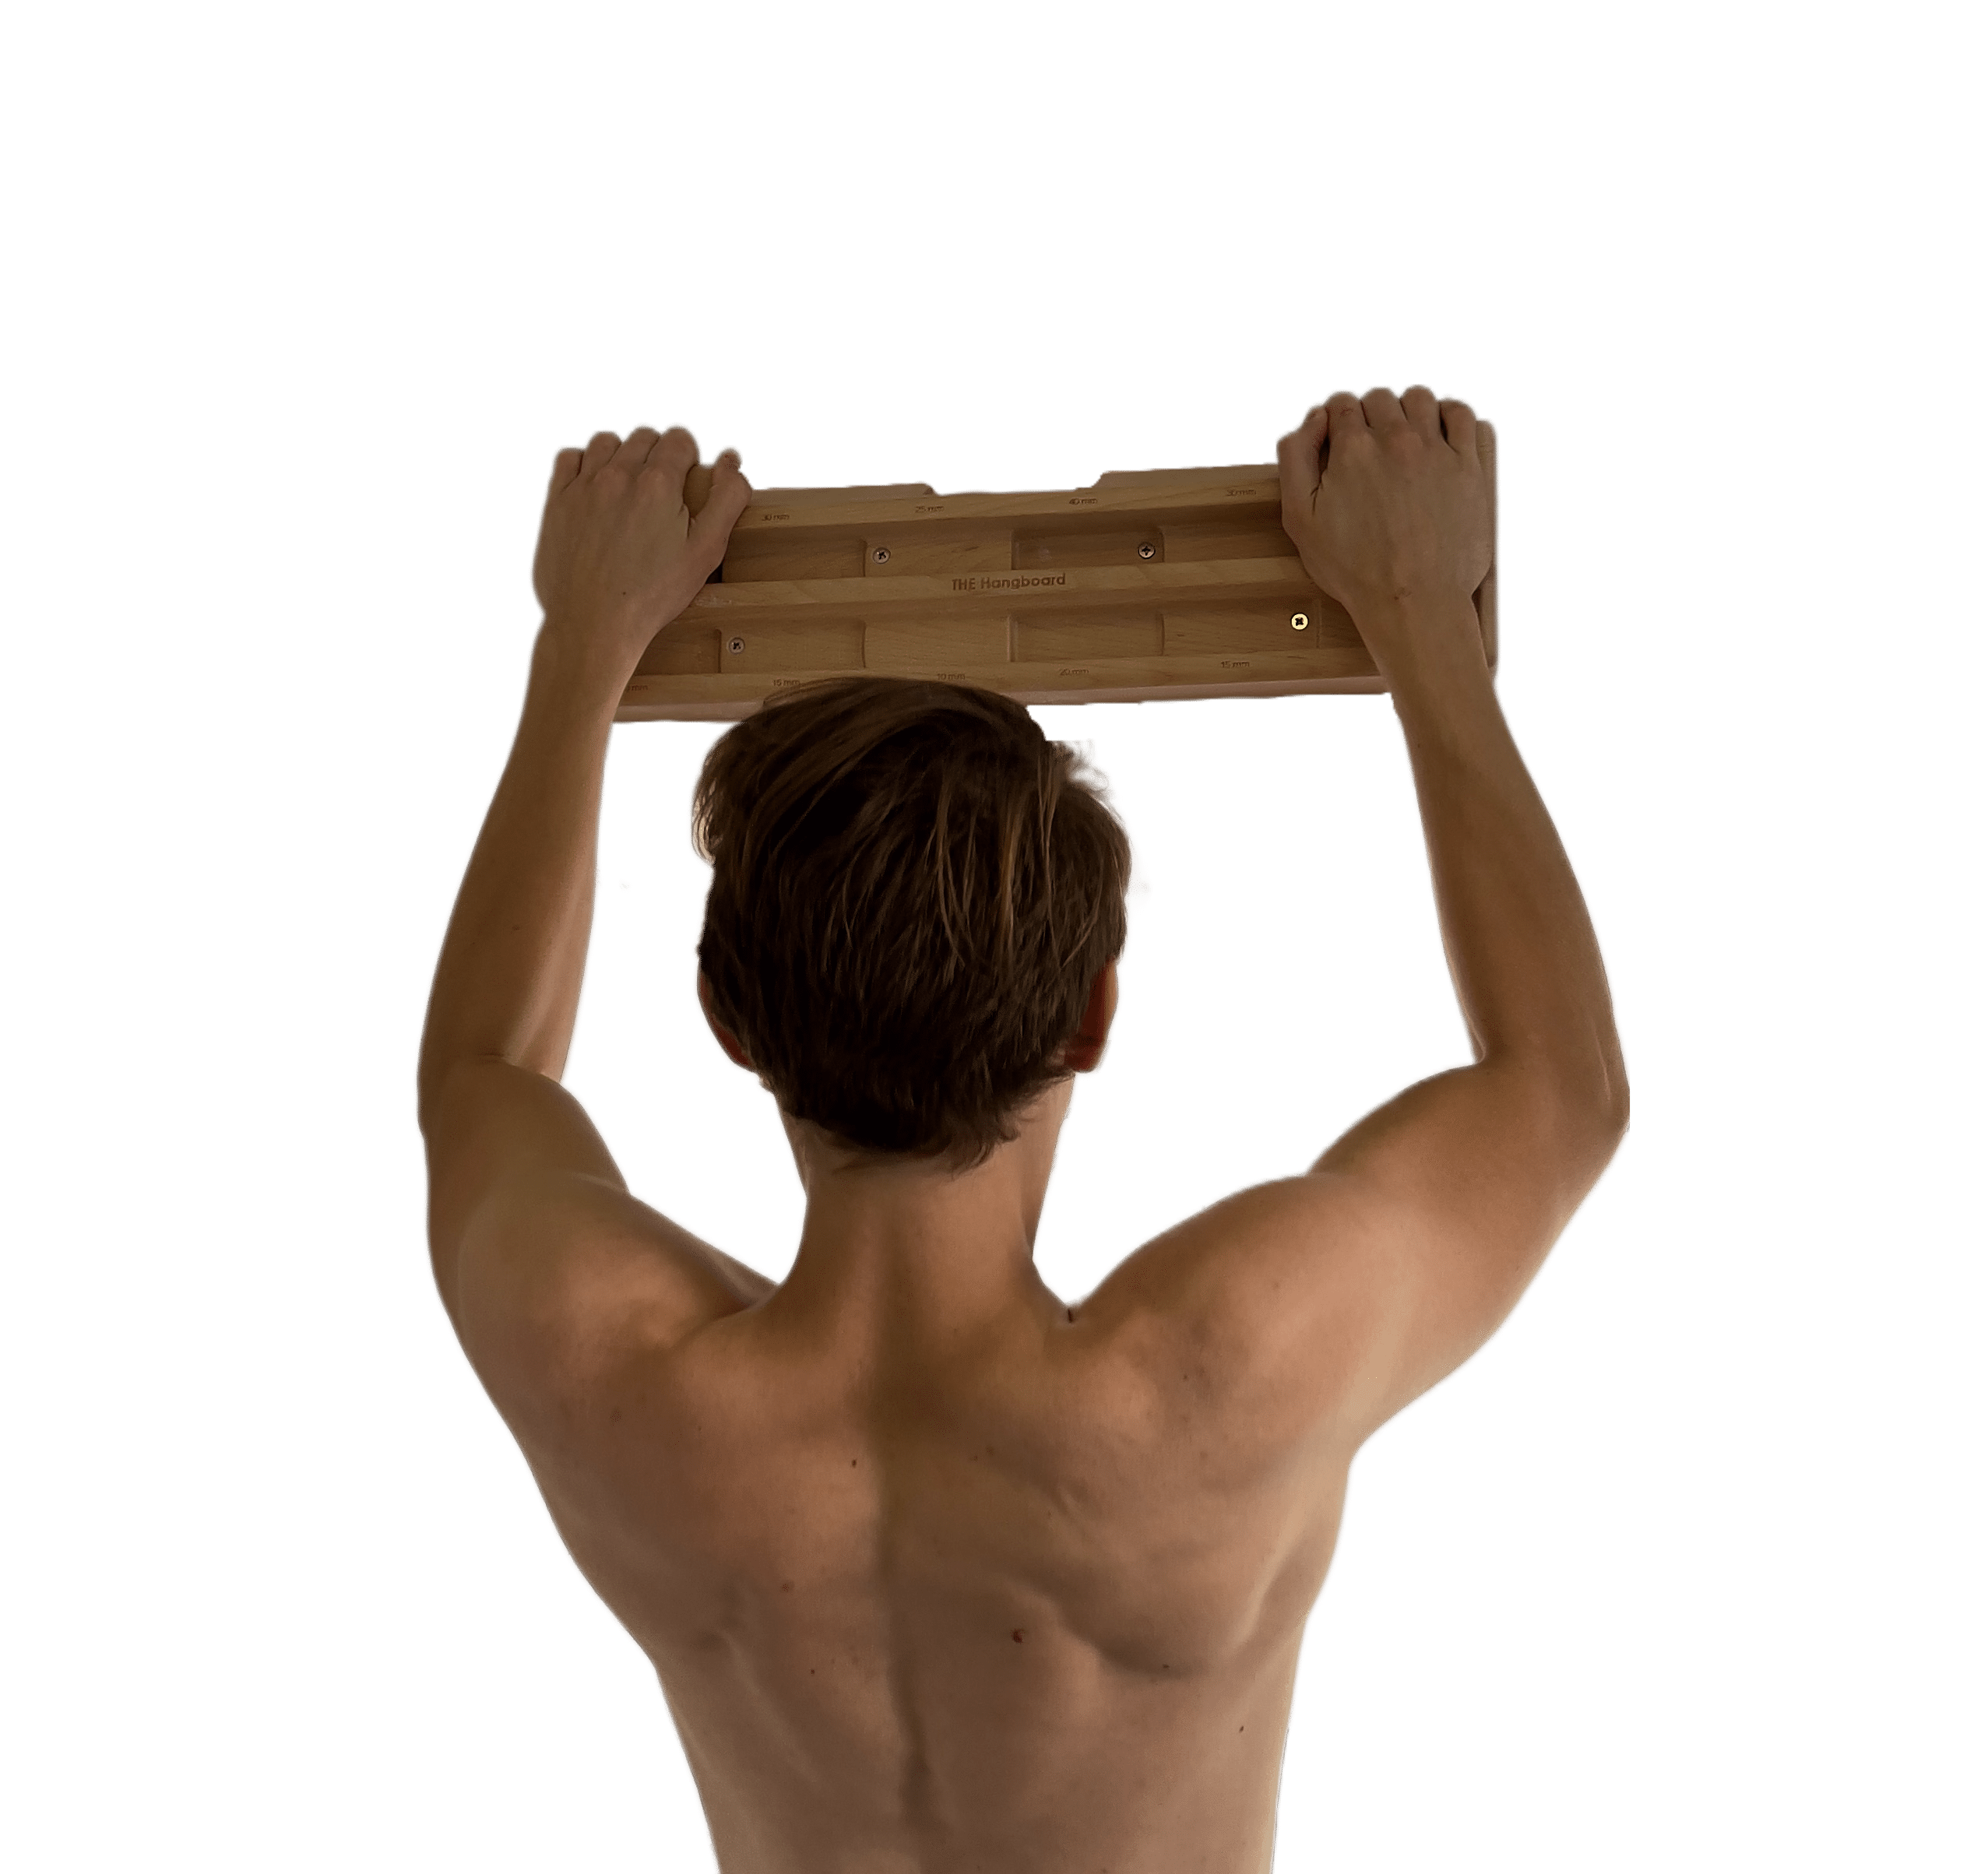 Performing a pullup on the hangboard